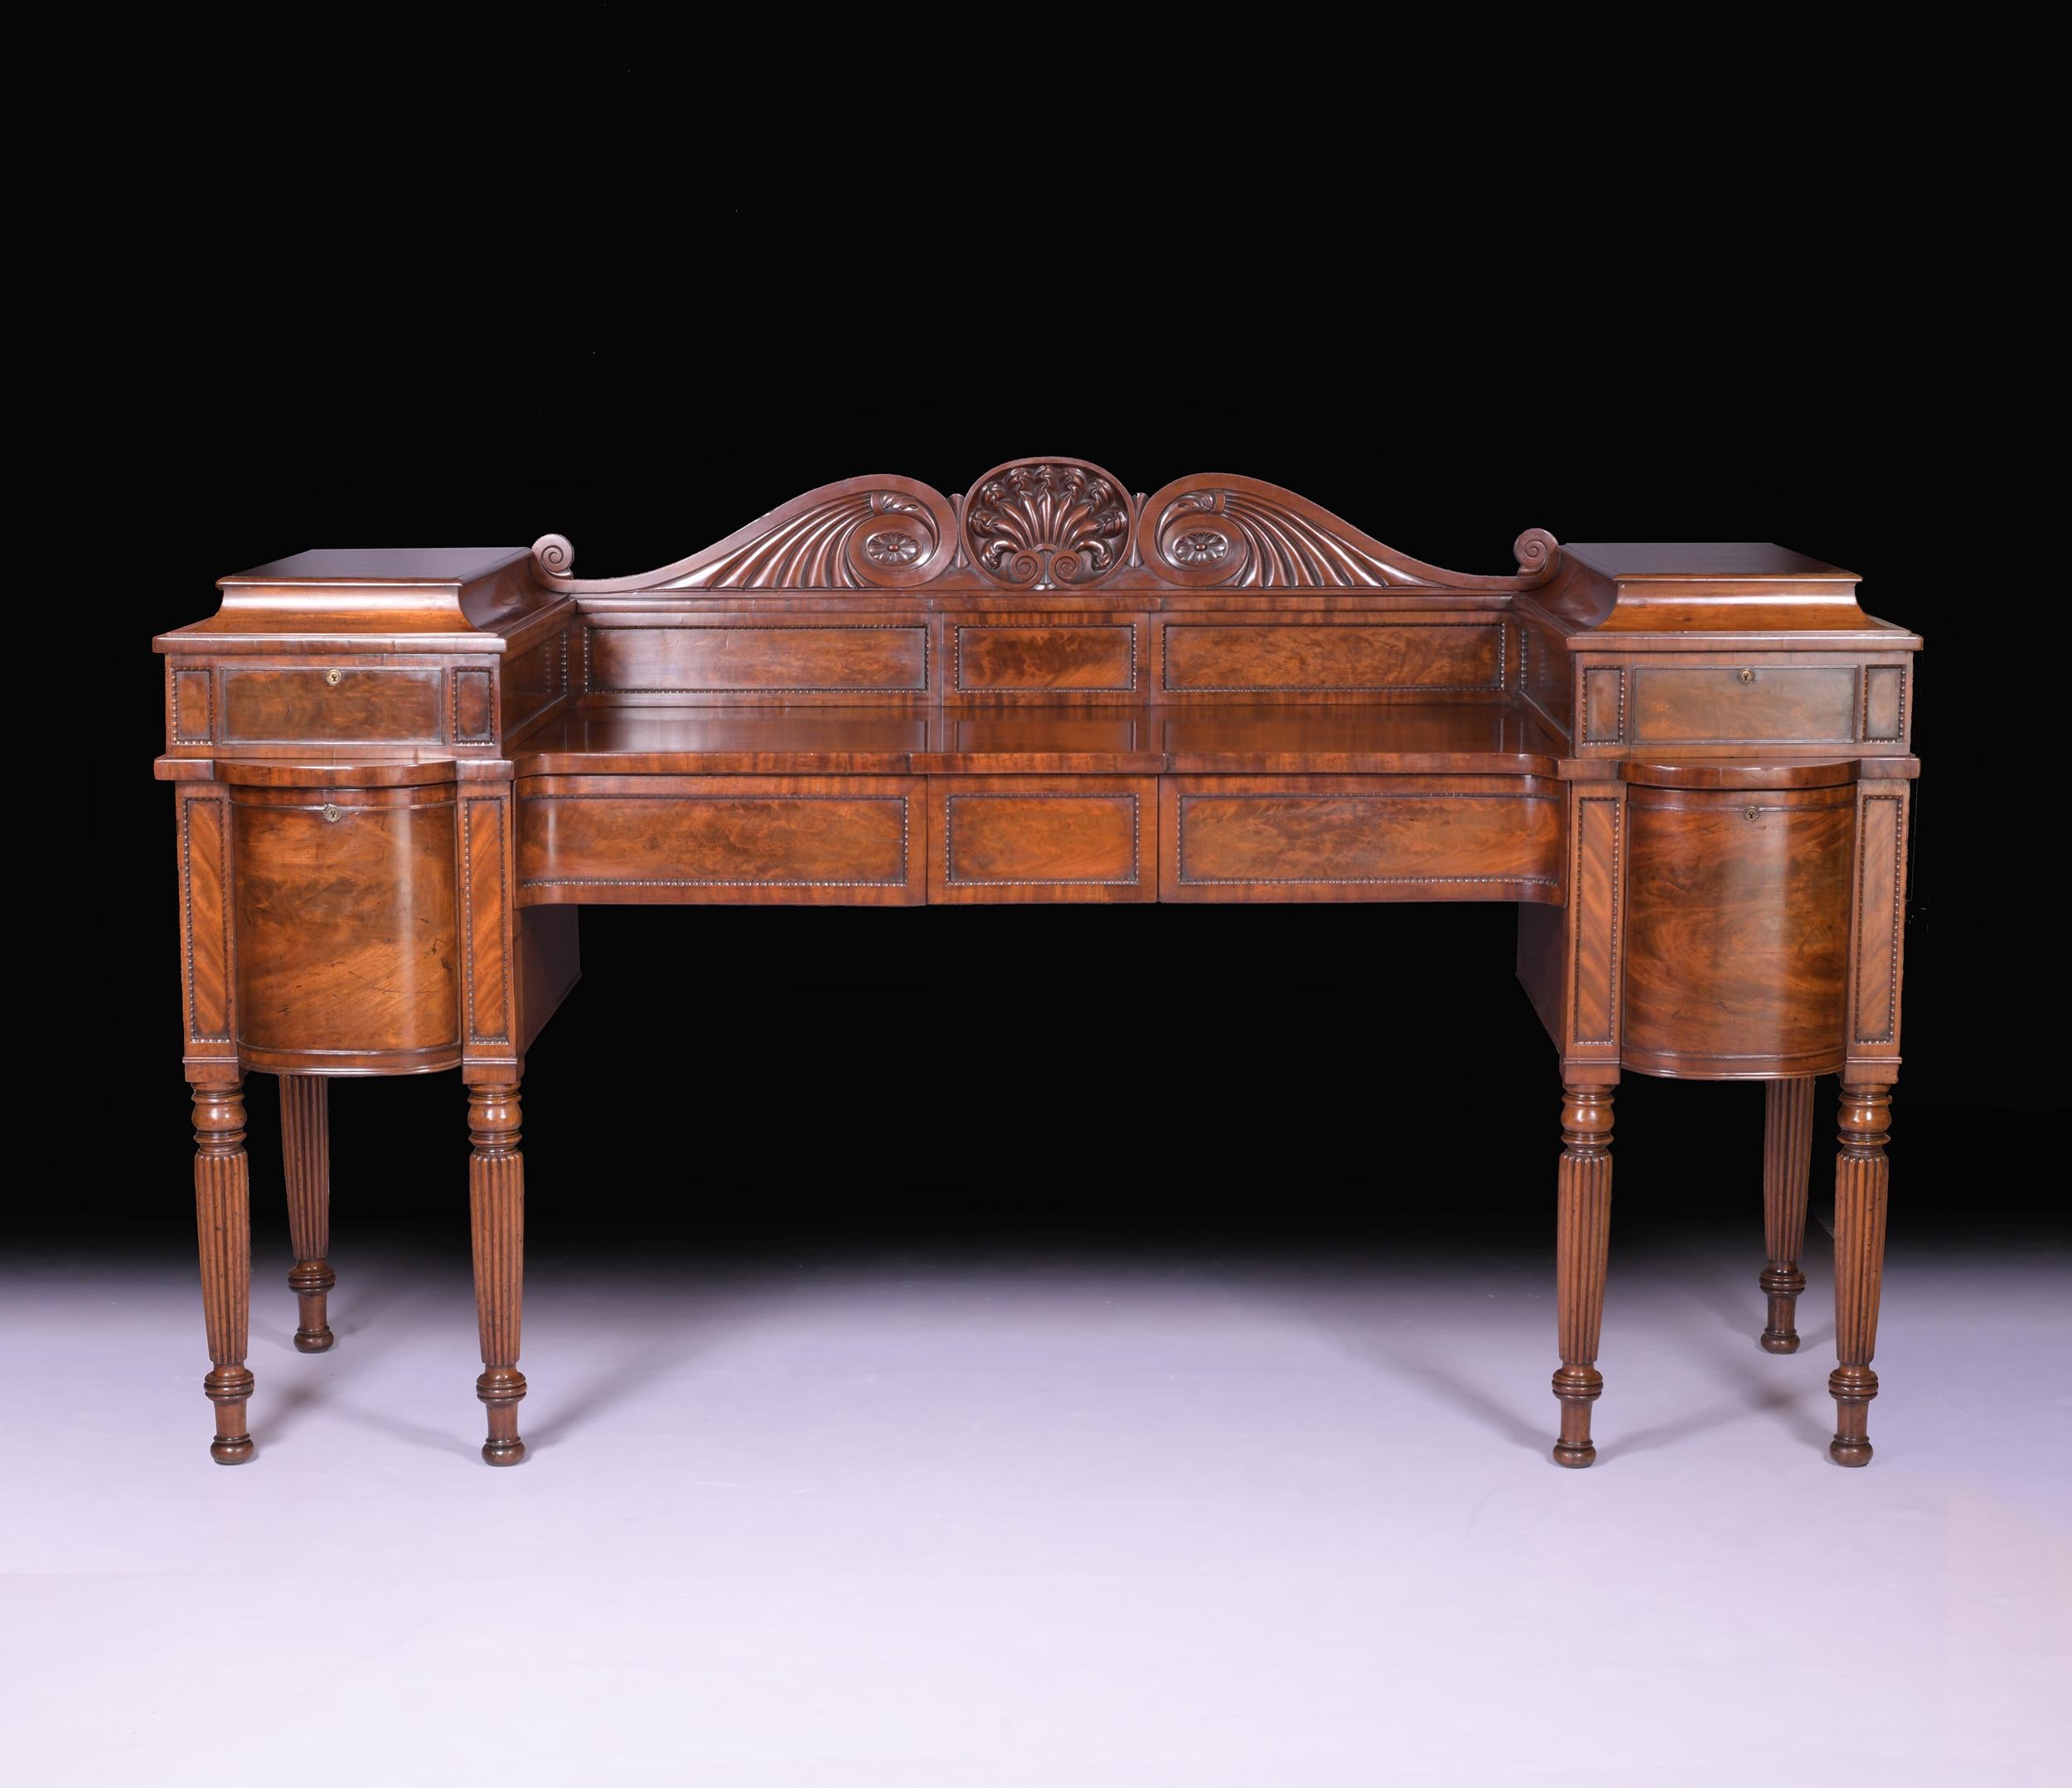 Early 19th Century English Regency Mahogany Sideboard in the Manner of Gillows For Sale 2